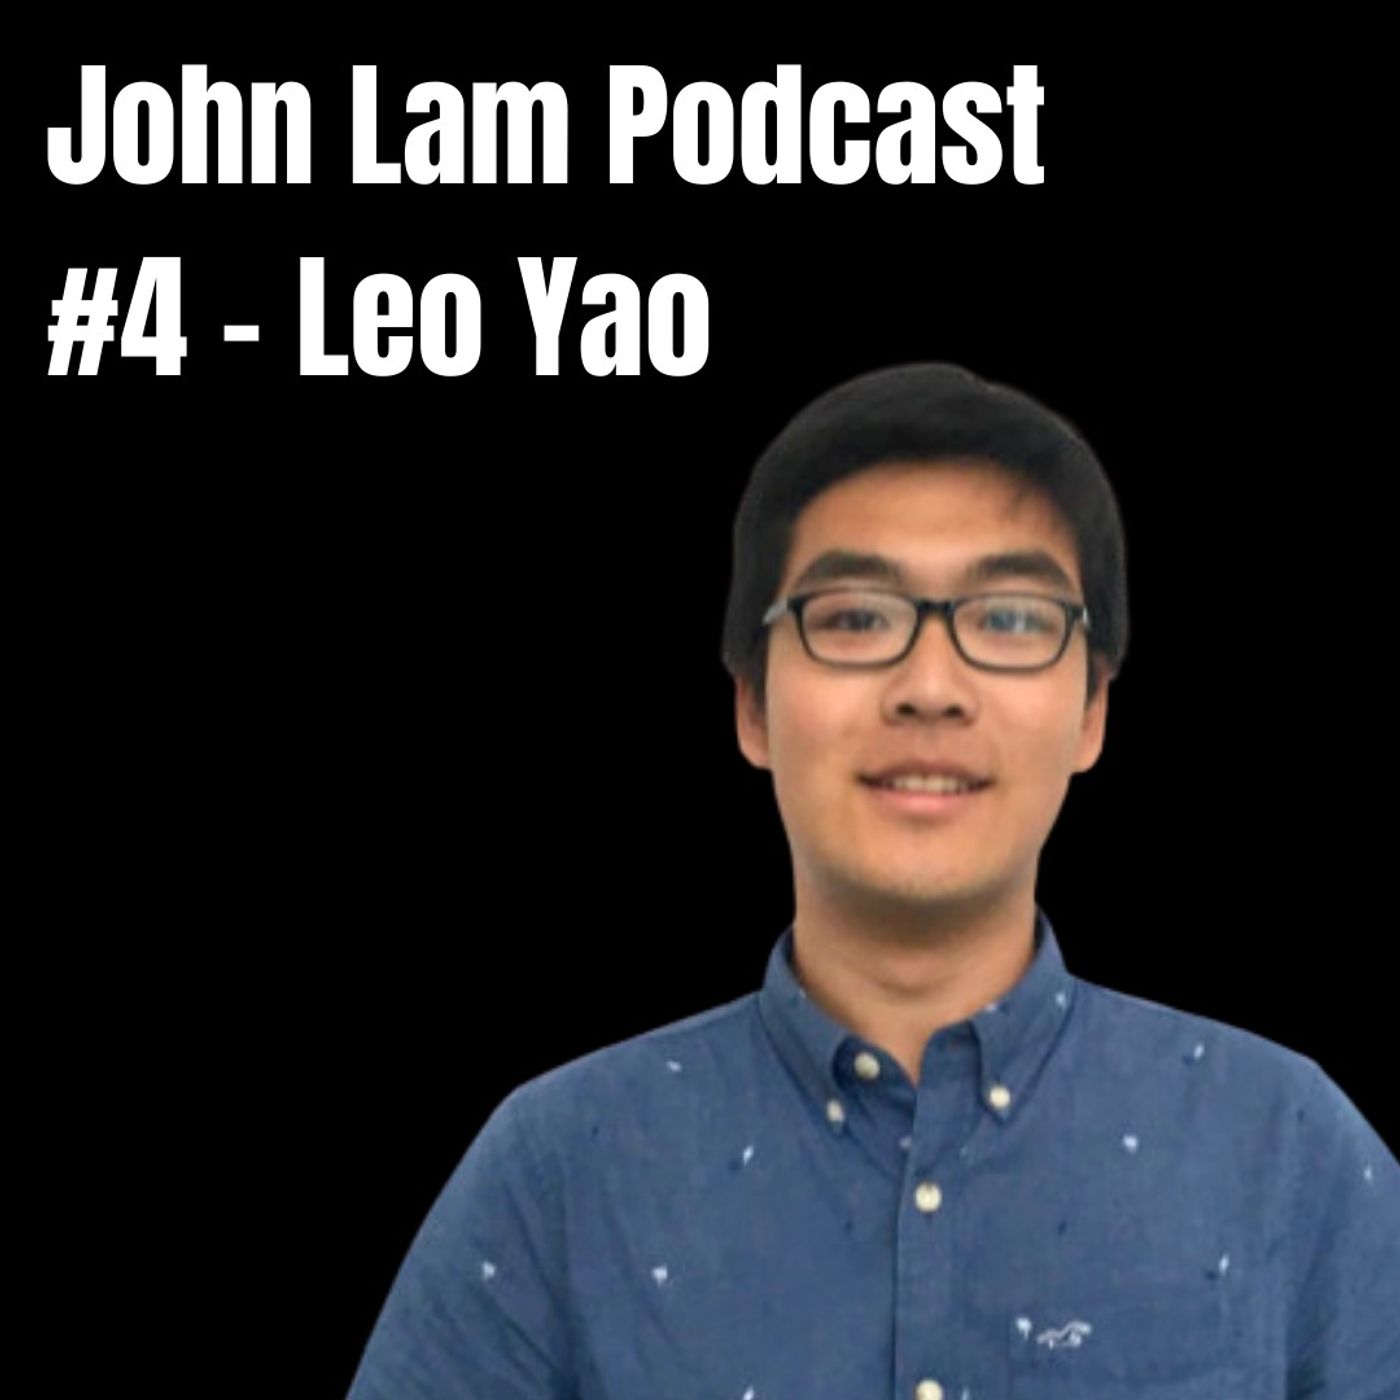 Ep.4 Leo Yao: on his immigrant journey from China to Microsoft, what it was like going to college and interning at Microsoft during COVID, and his first impressions of life as a PM